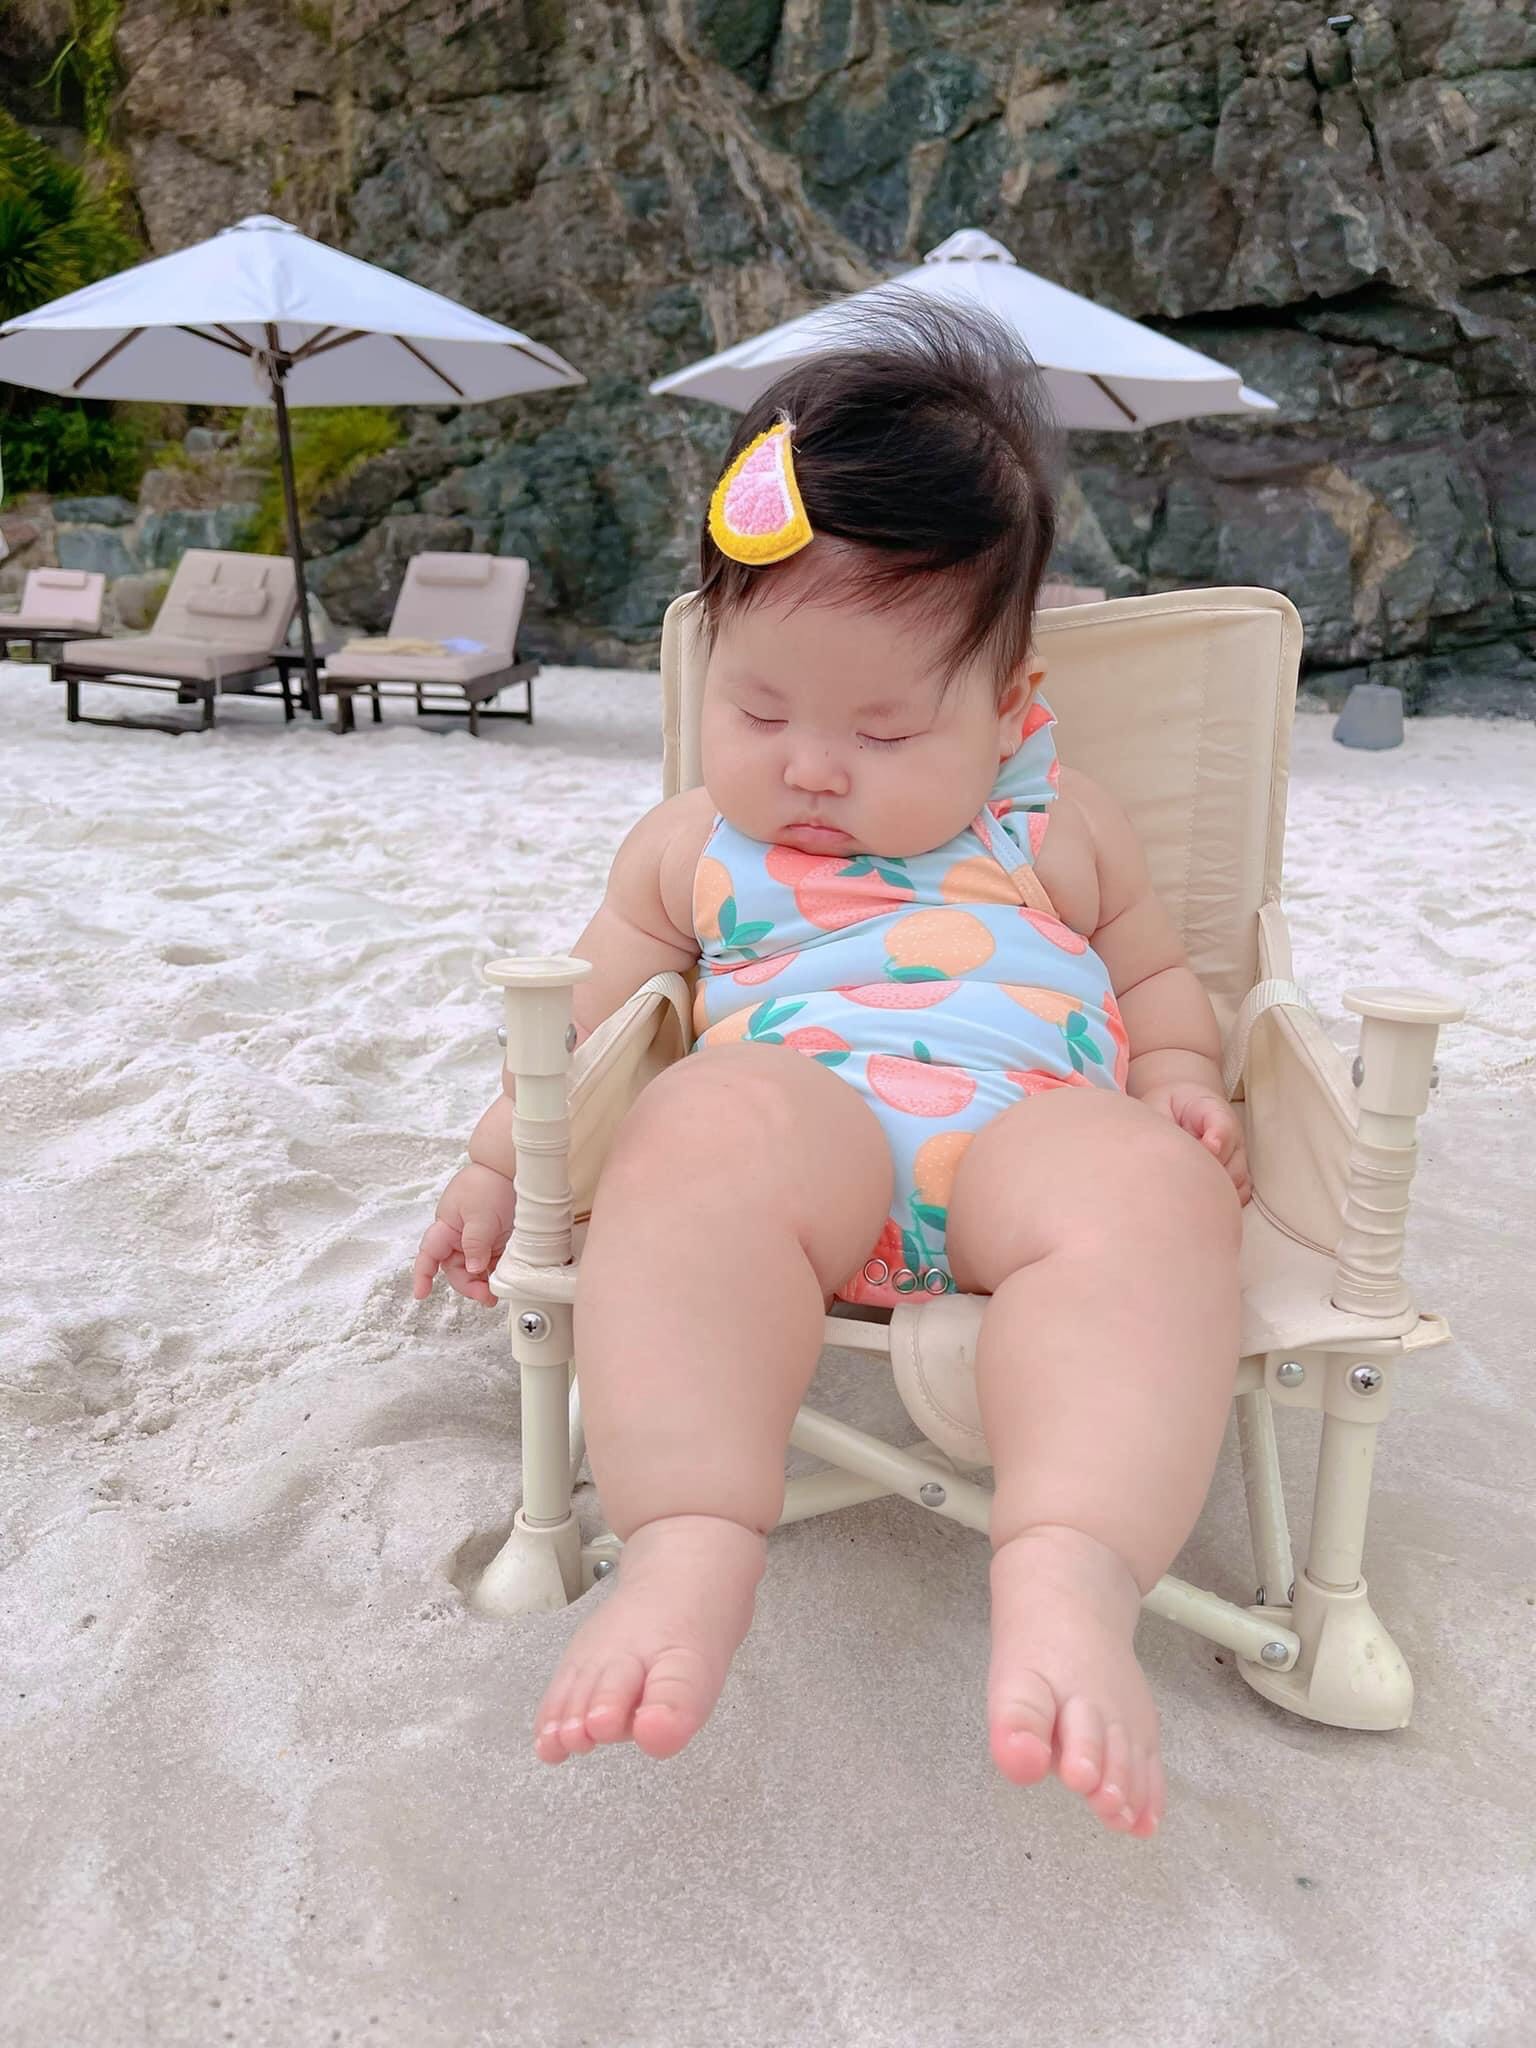 While swimming, sleepiness came suddenly, a 7-month-old baby caused netizens to have a fever when he fell asleep on the beach of Nha Trang - Photo 4.